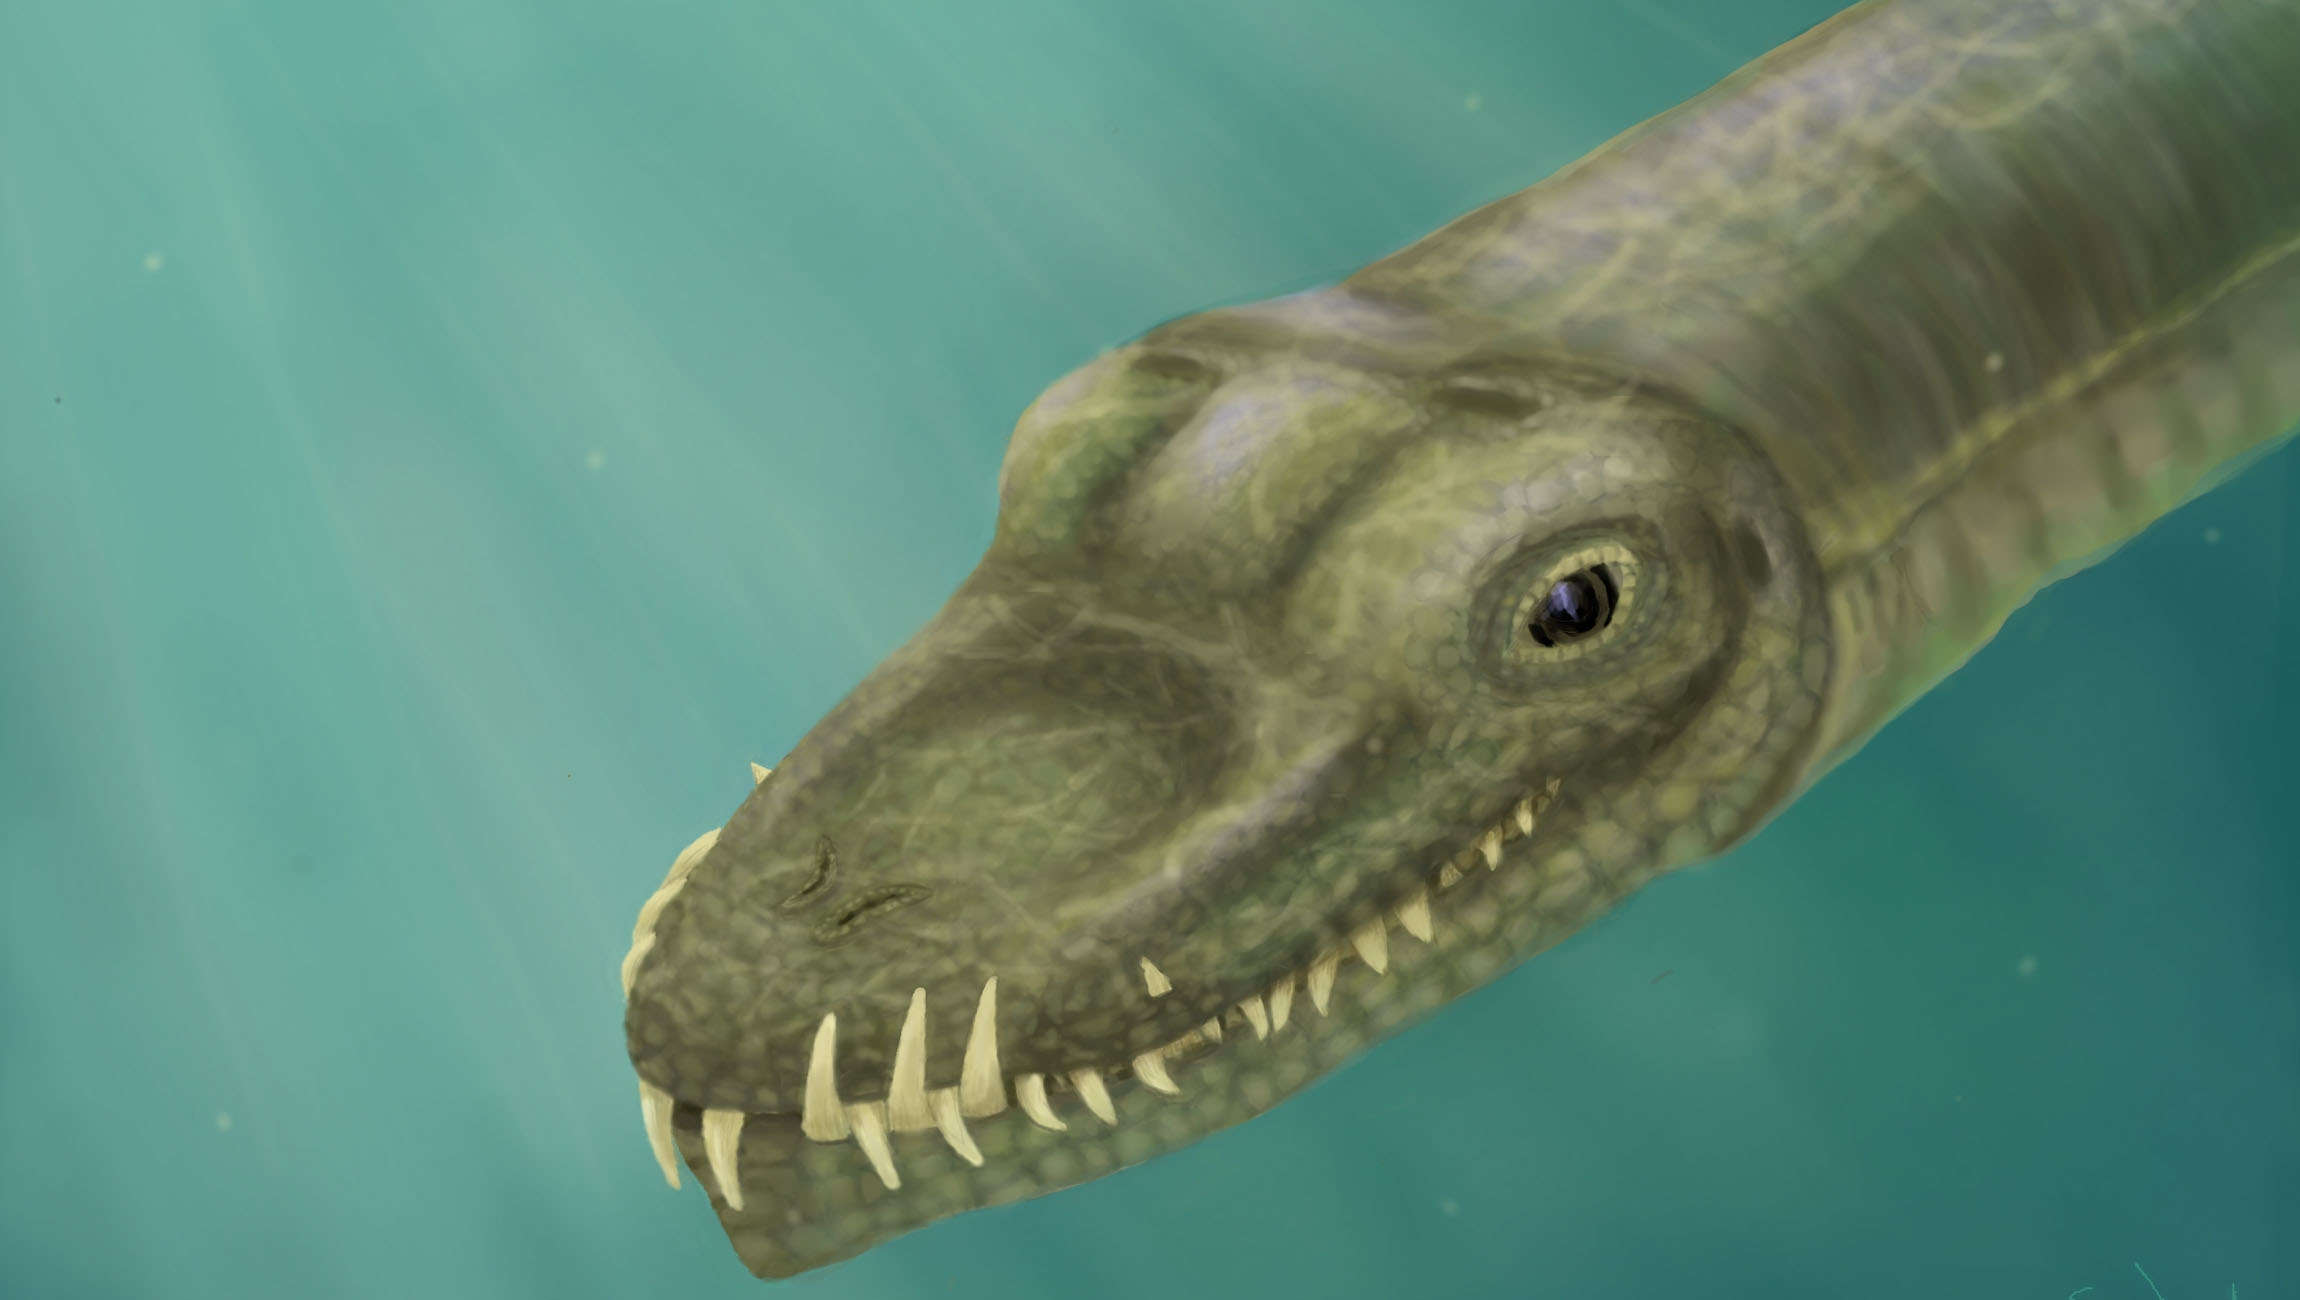 Tanystropheus had a disproportionate neck three times its body length — but  why? | SYFY WIRE